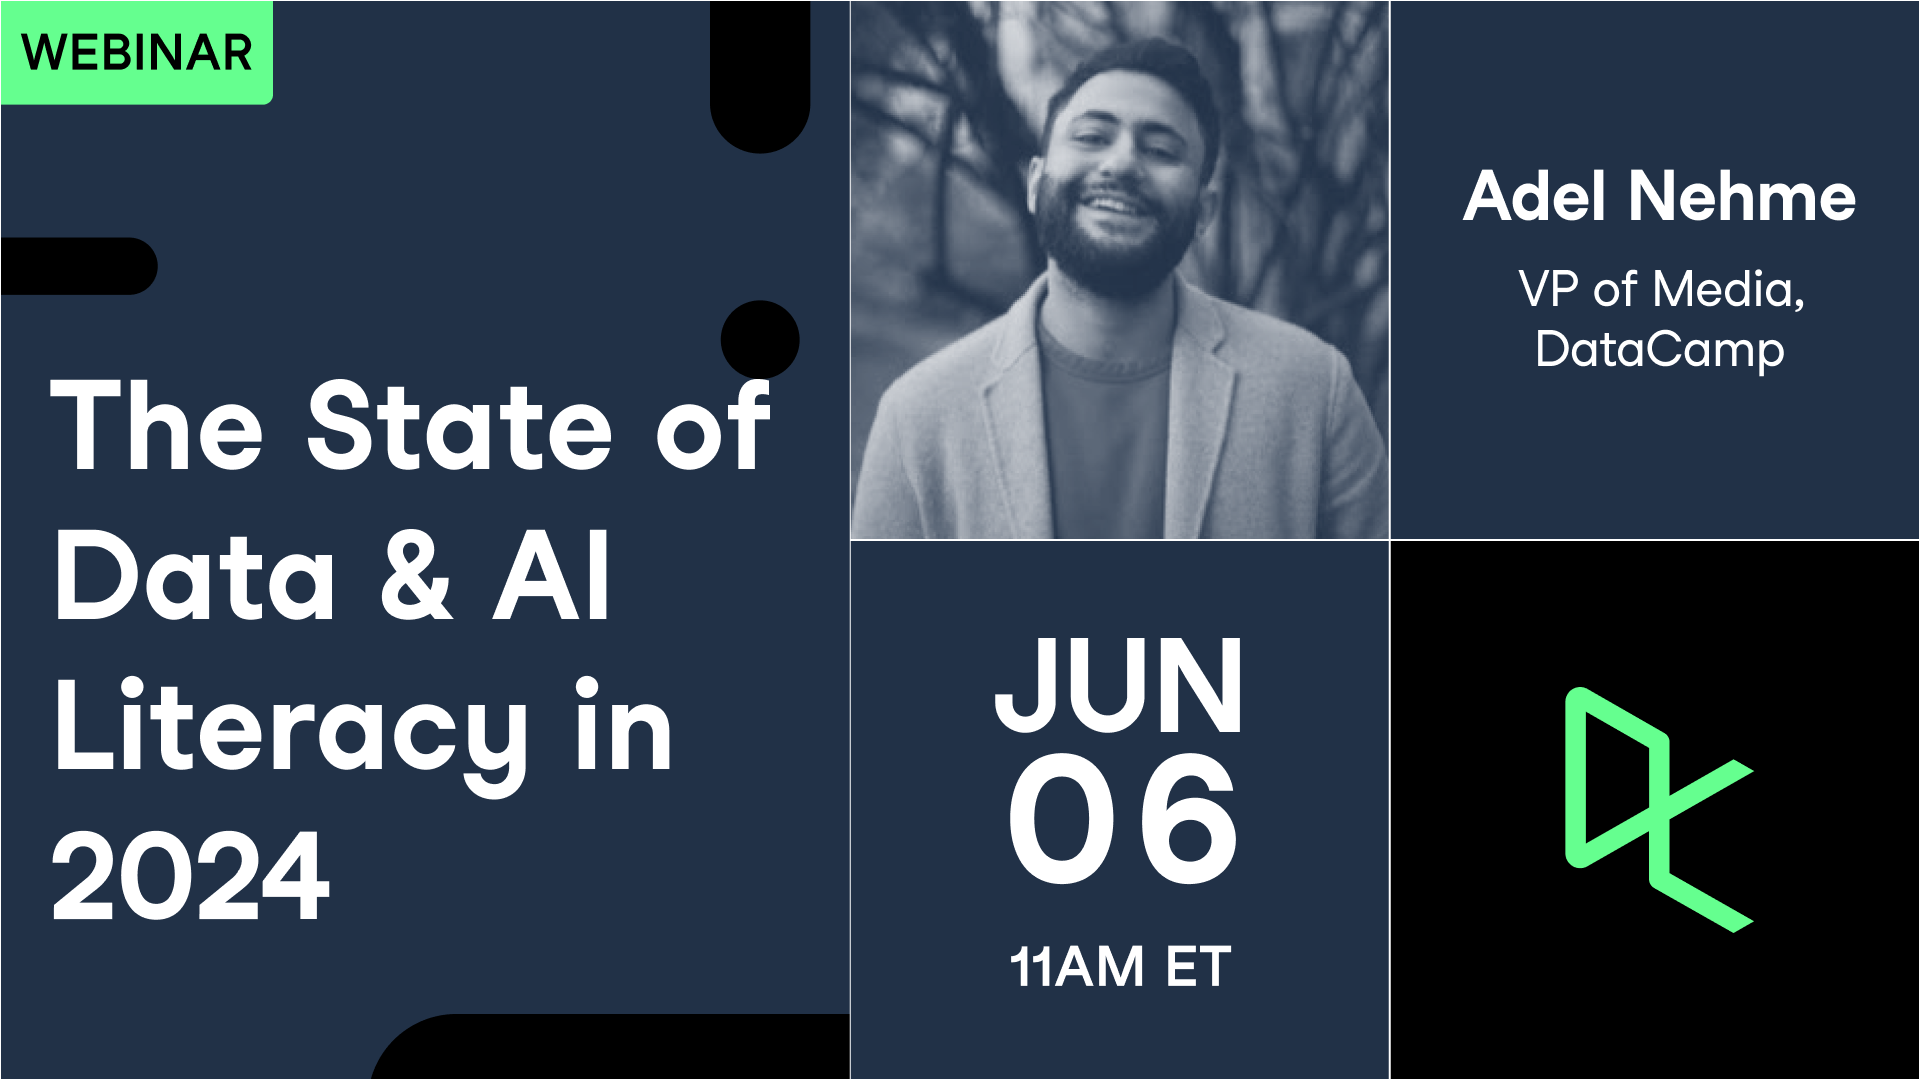 The State of Data & AI Literacy in 2024 DataCamp